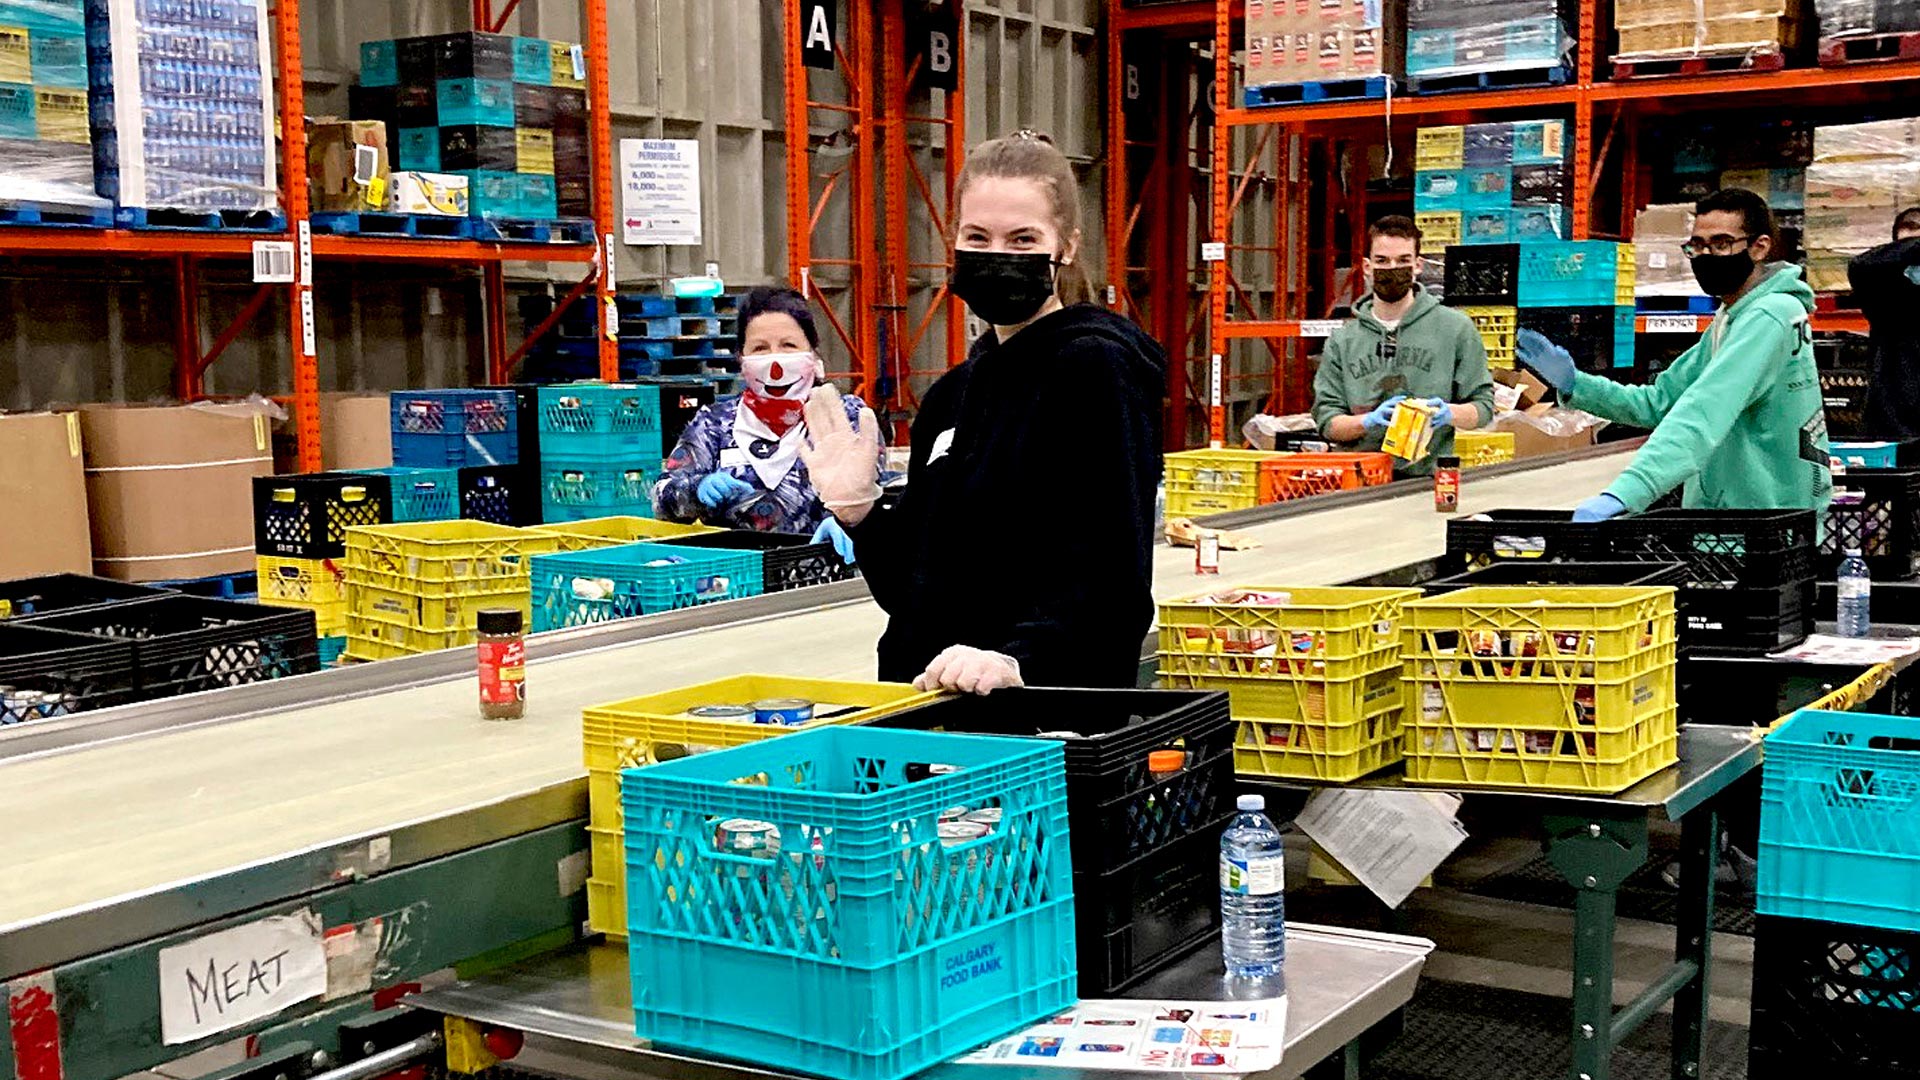 A woman is standing at a sorting line for non-perishable food items waving!